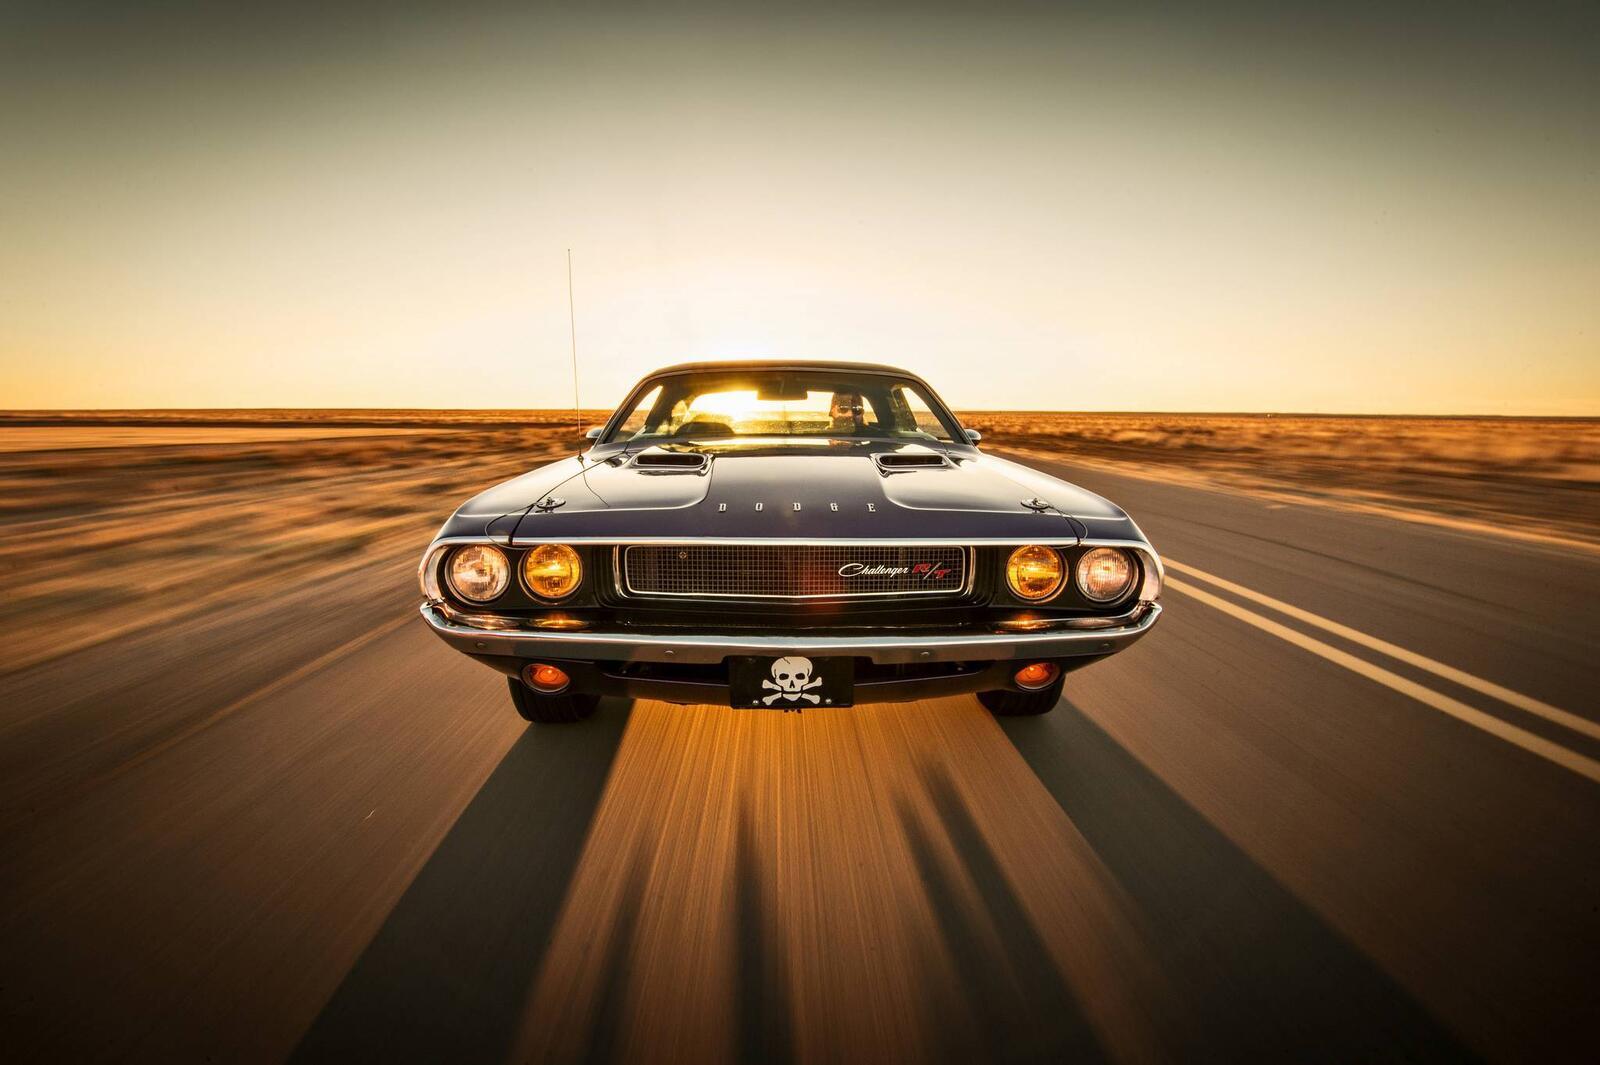 Wallpapers Dodge Challenger muscle car classic on the desktop